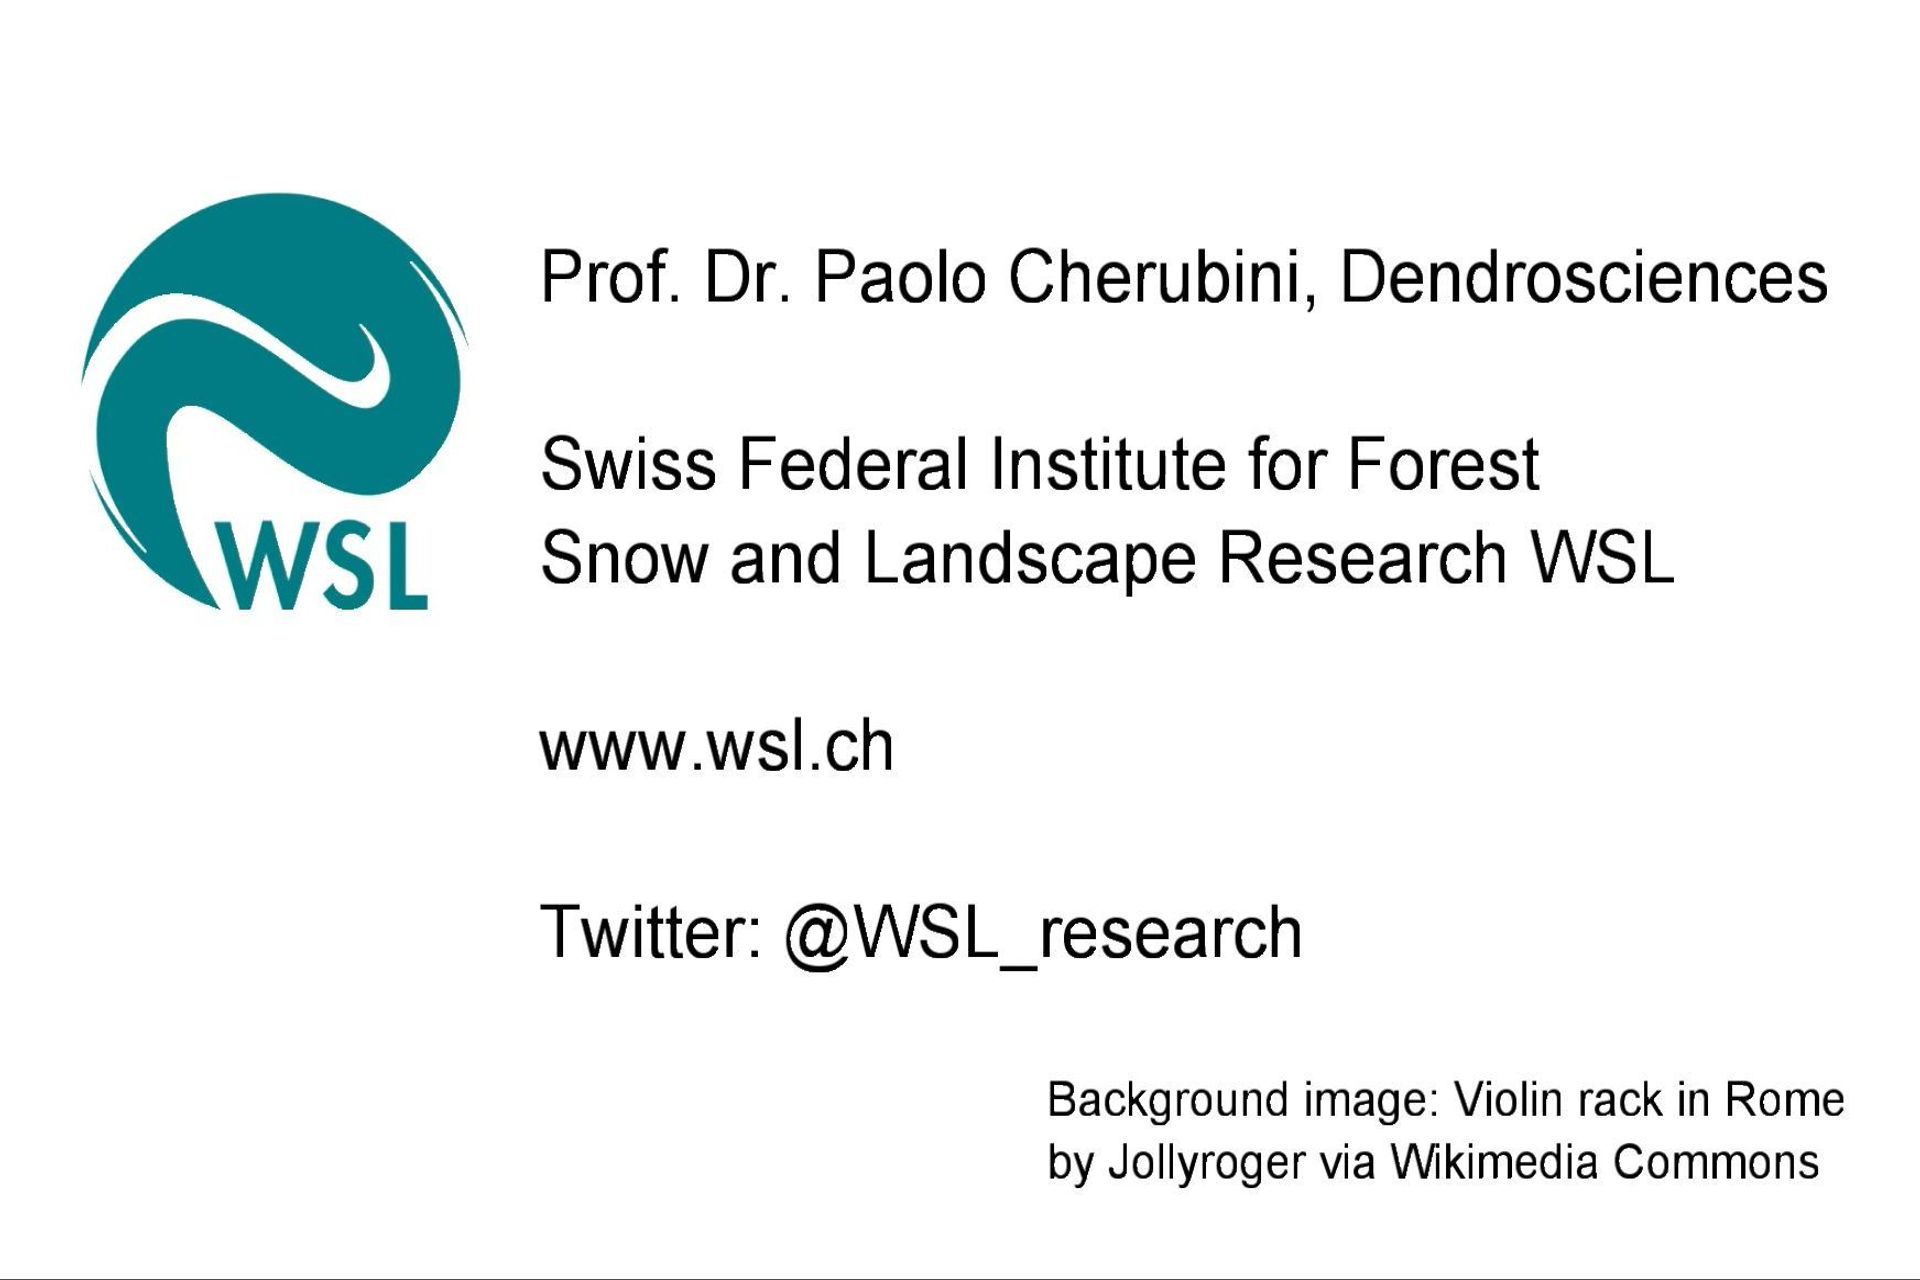 Si Paolo Cherubini ay Senior Scientist sa Forest Dynamics sa Swiss Federal Institute for Forest, Snow and Landscape Research